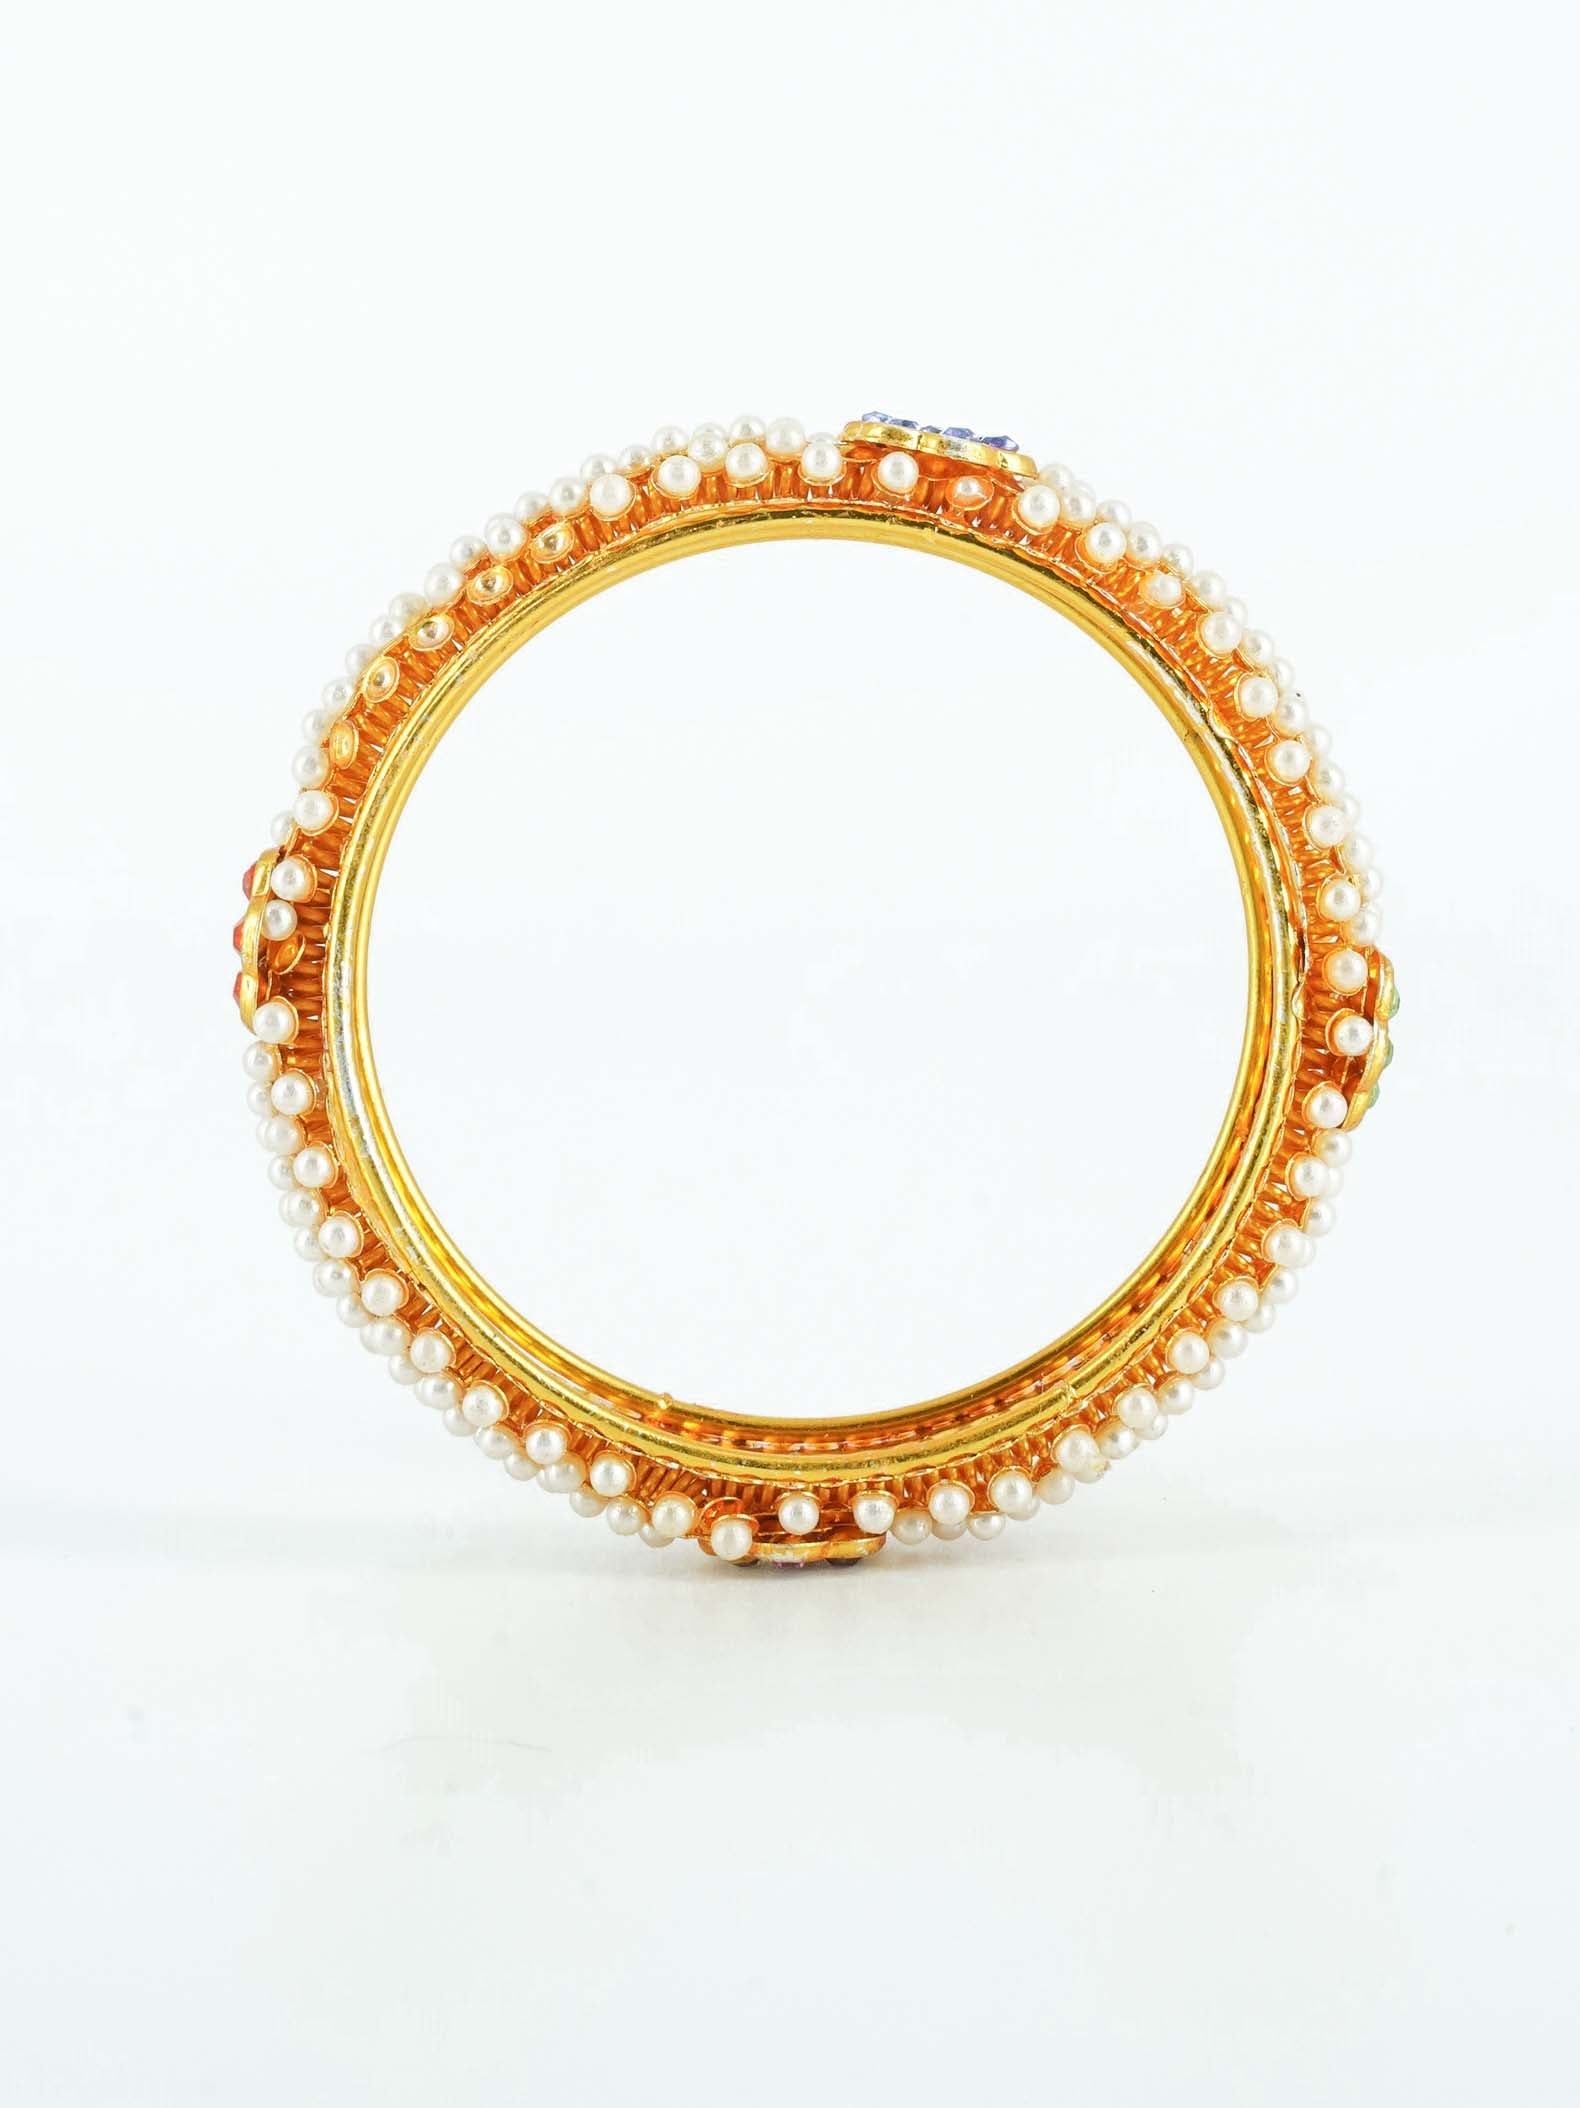 Gold Plated great finish Two Broad 4 thin Set of 6 bangles with pearls studded 8805A